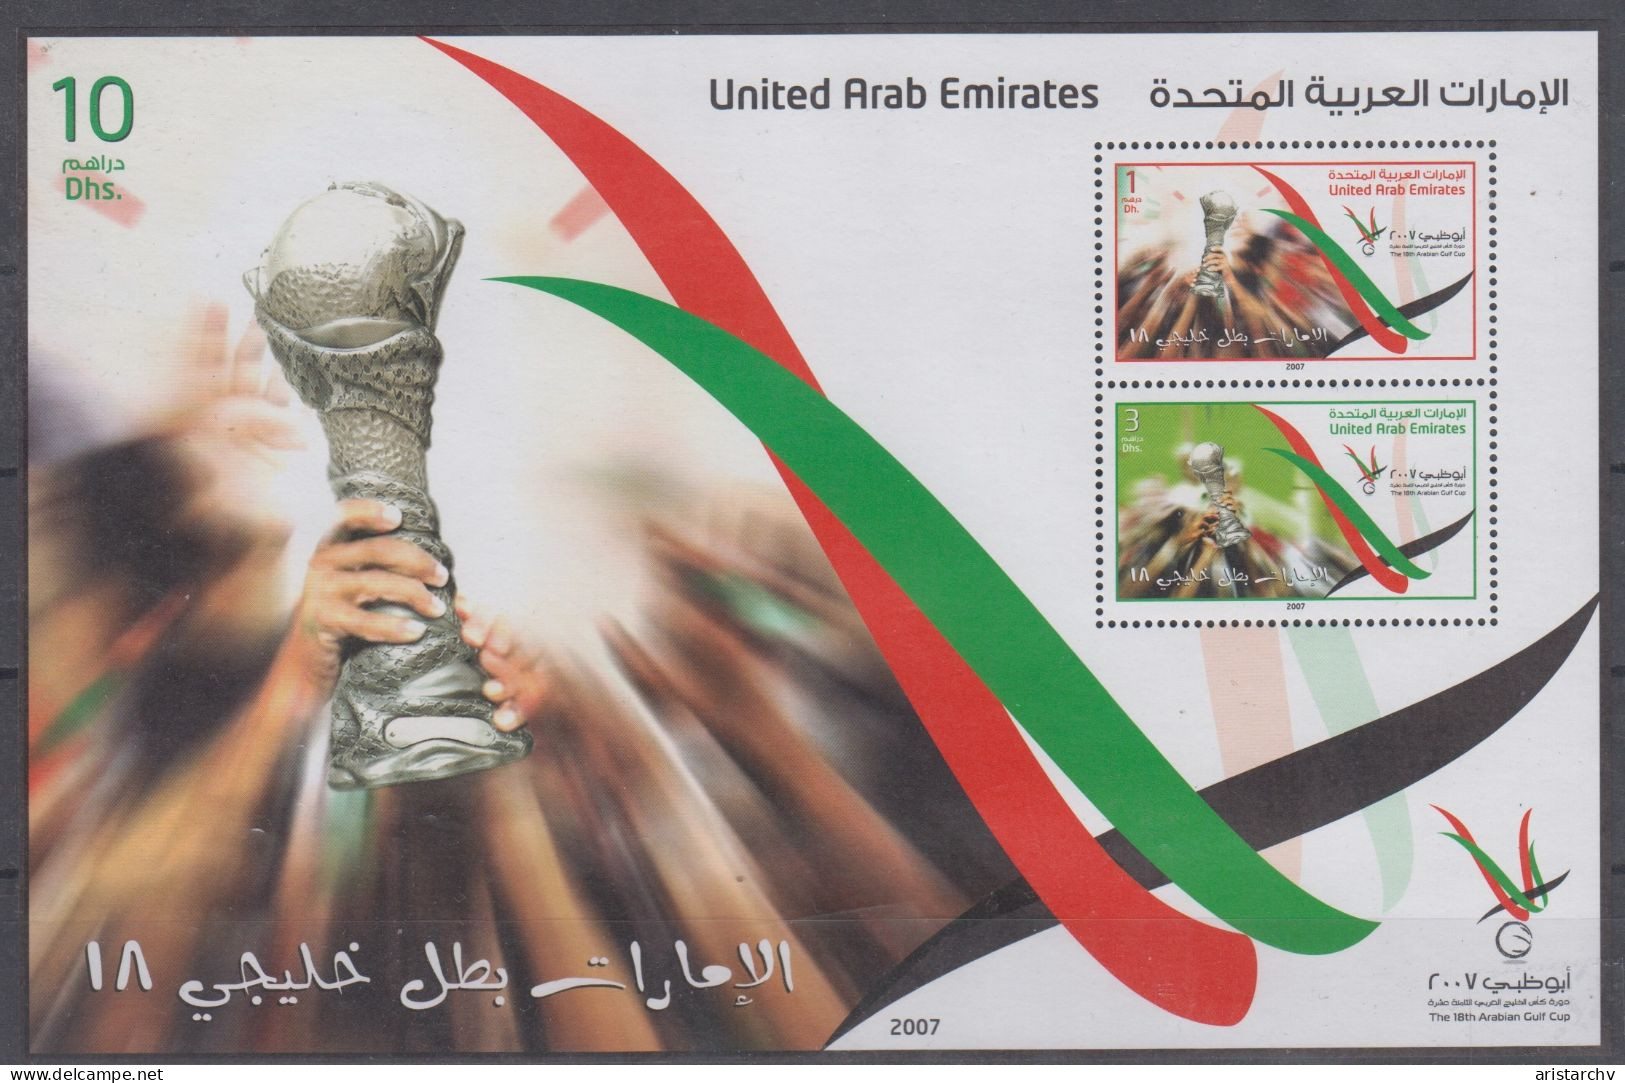 UAE 2007 FOOTBALL ARABIAN GULF CUP S/SHEET AND 2 STAMPS - AFC Asian Cup